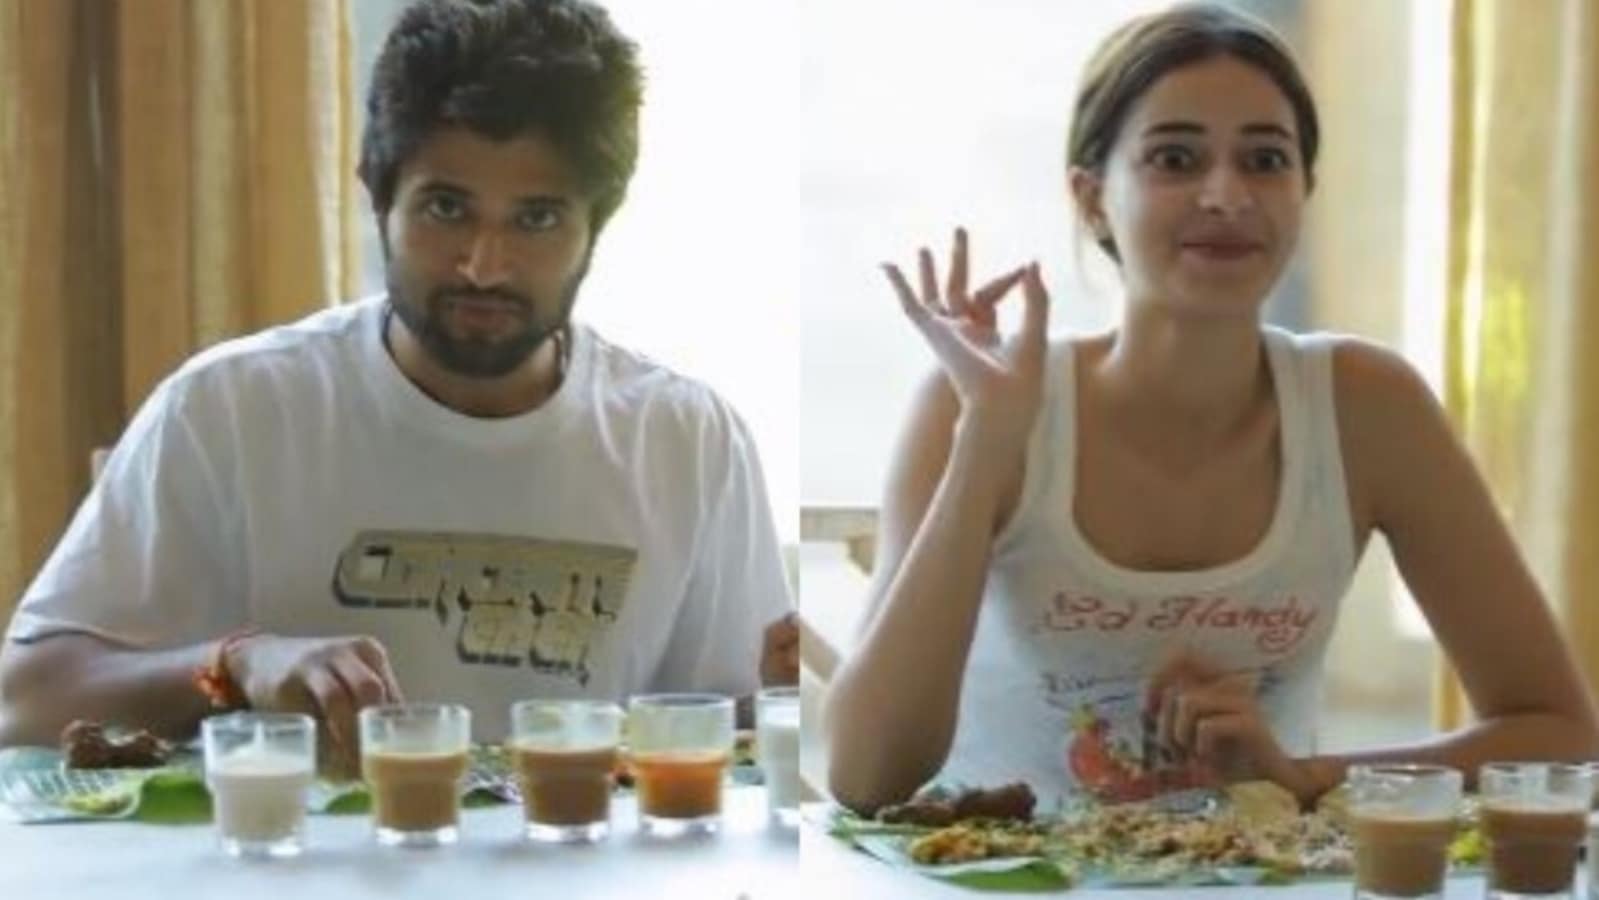 Vijay Deverakonda goes ‘what a meal’ as he feasts on Kerala sadya with Ananya Panday while promoting Liger. Watch